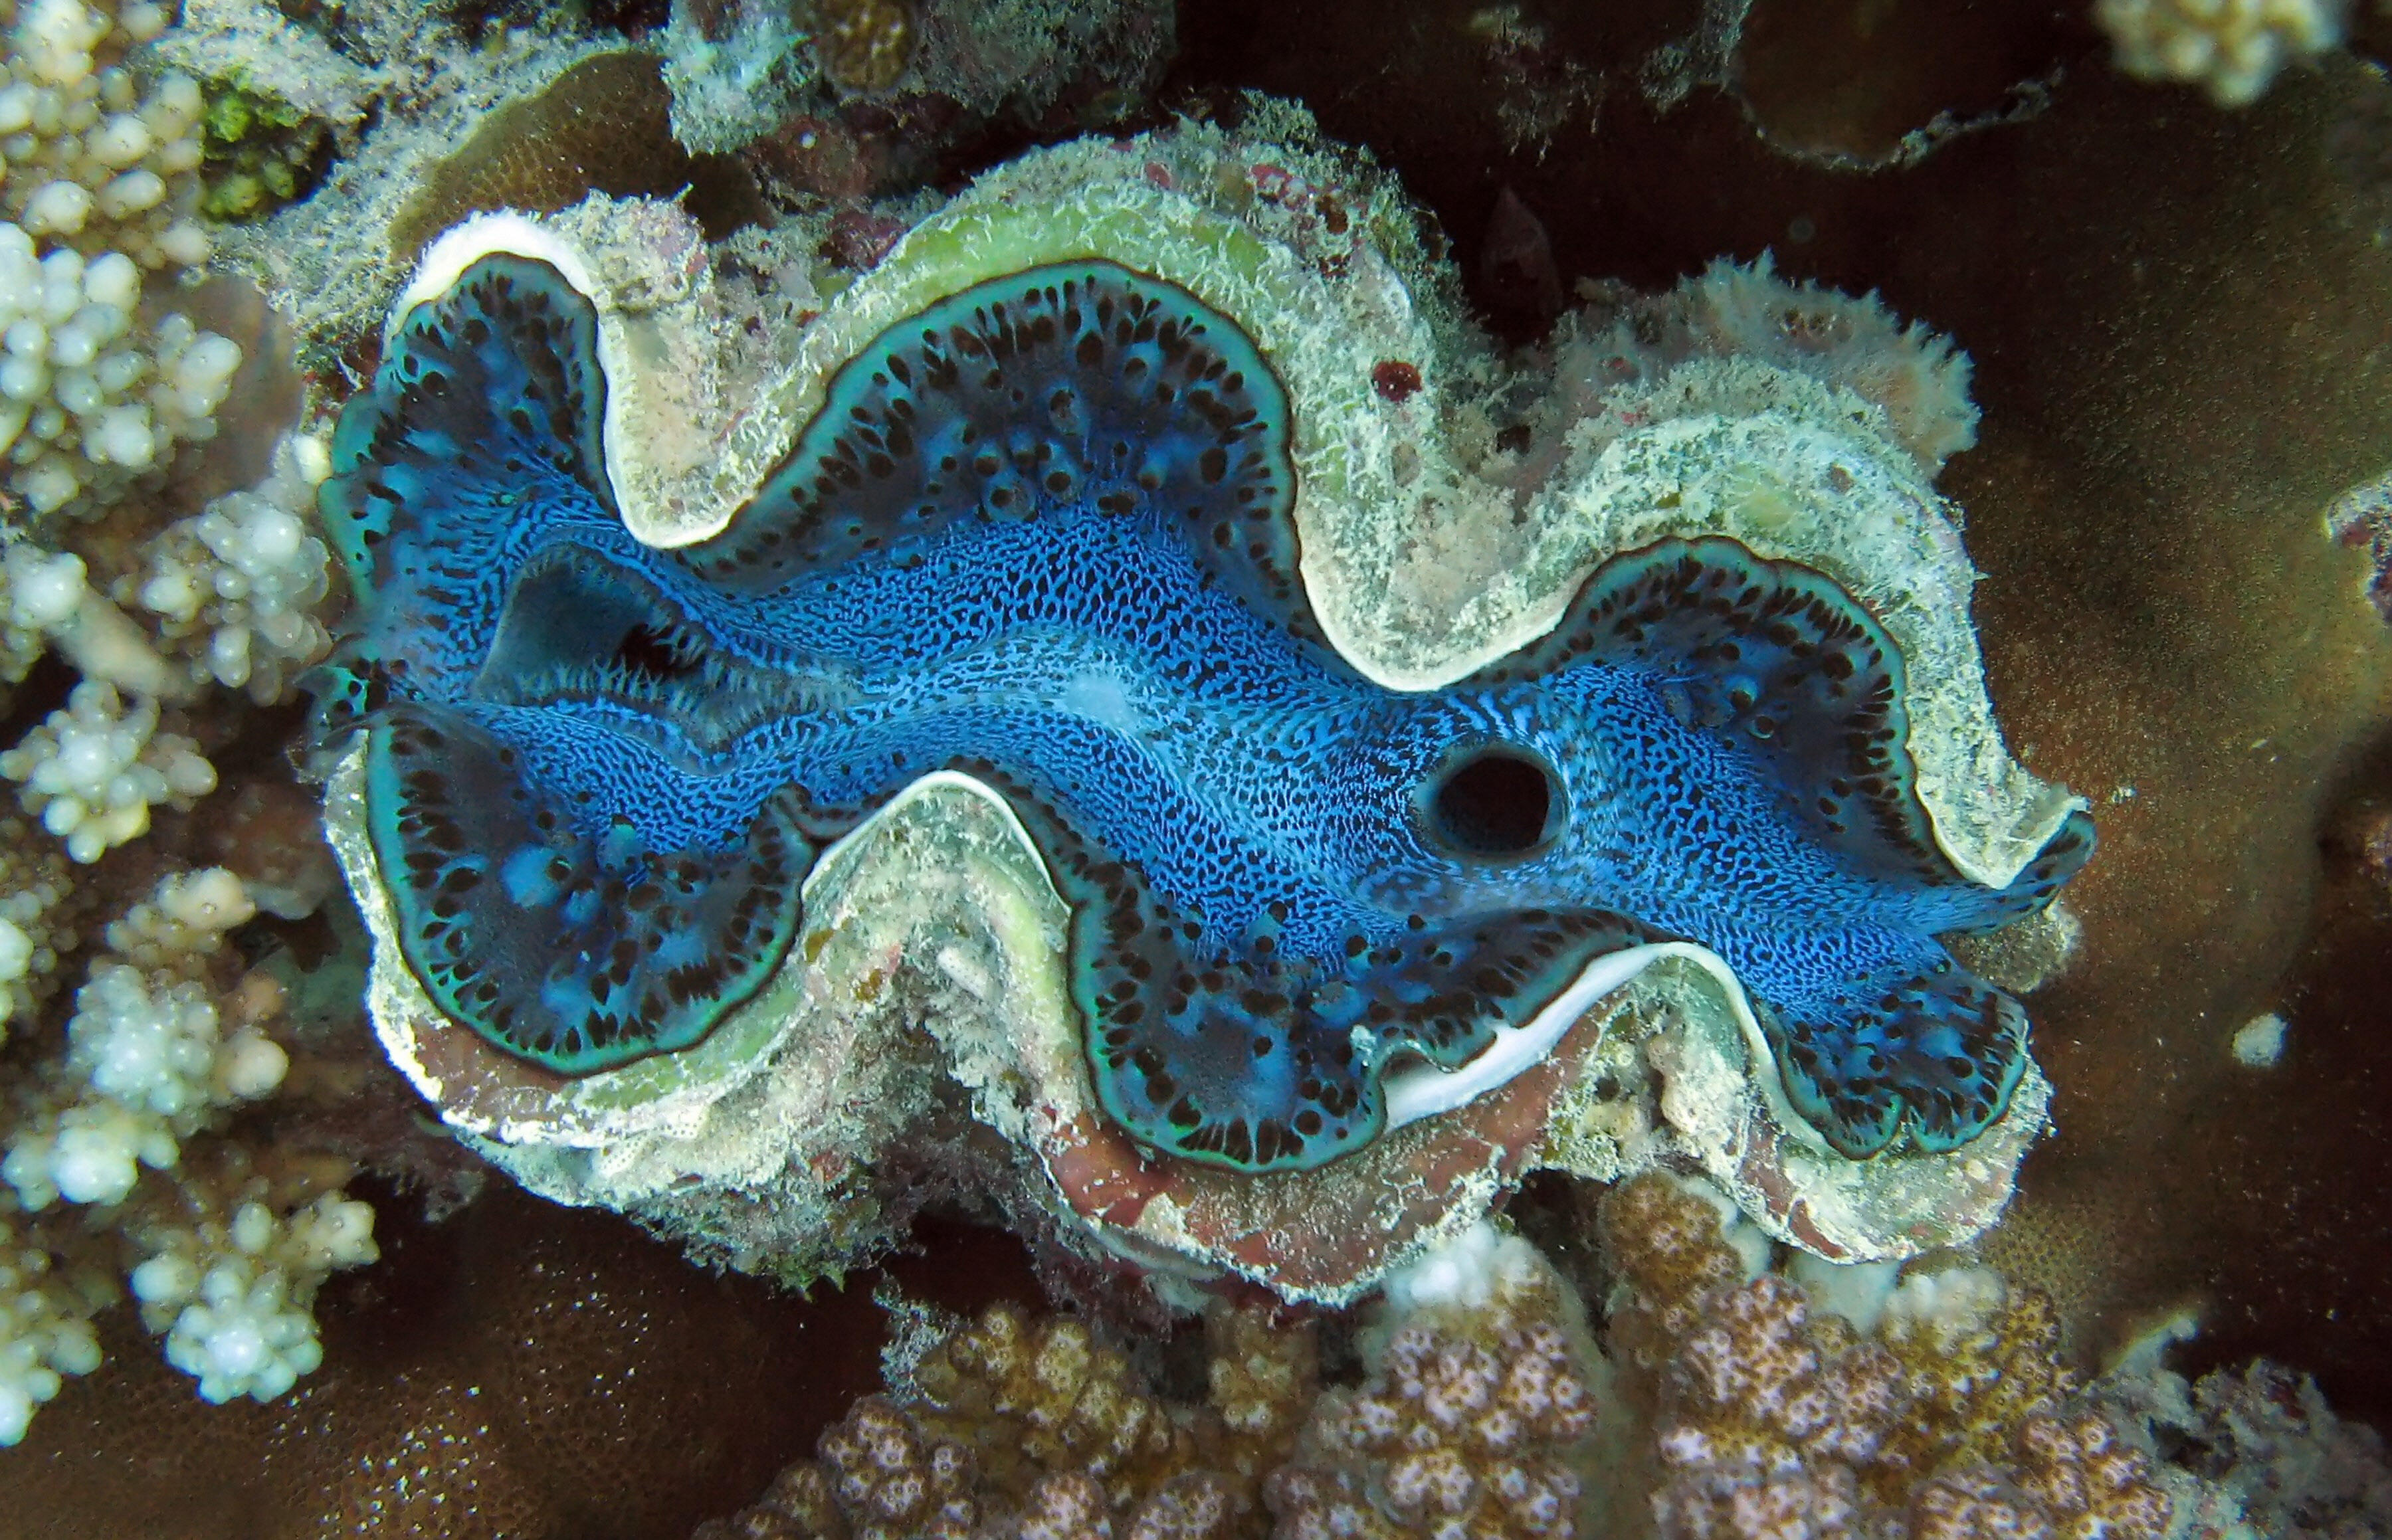 China Poaching Giant Clams Is a Step to 